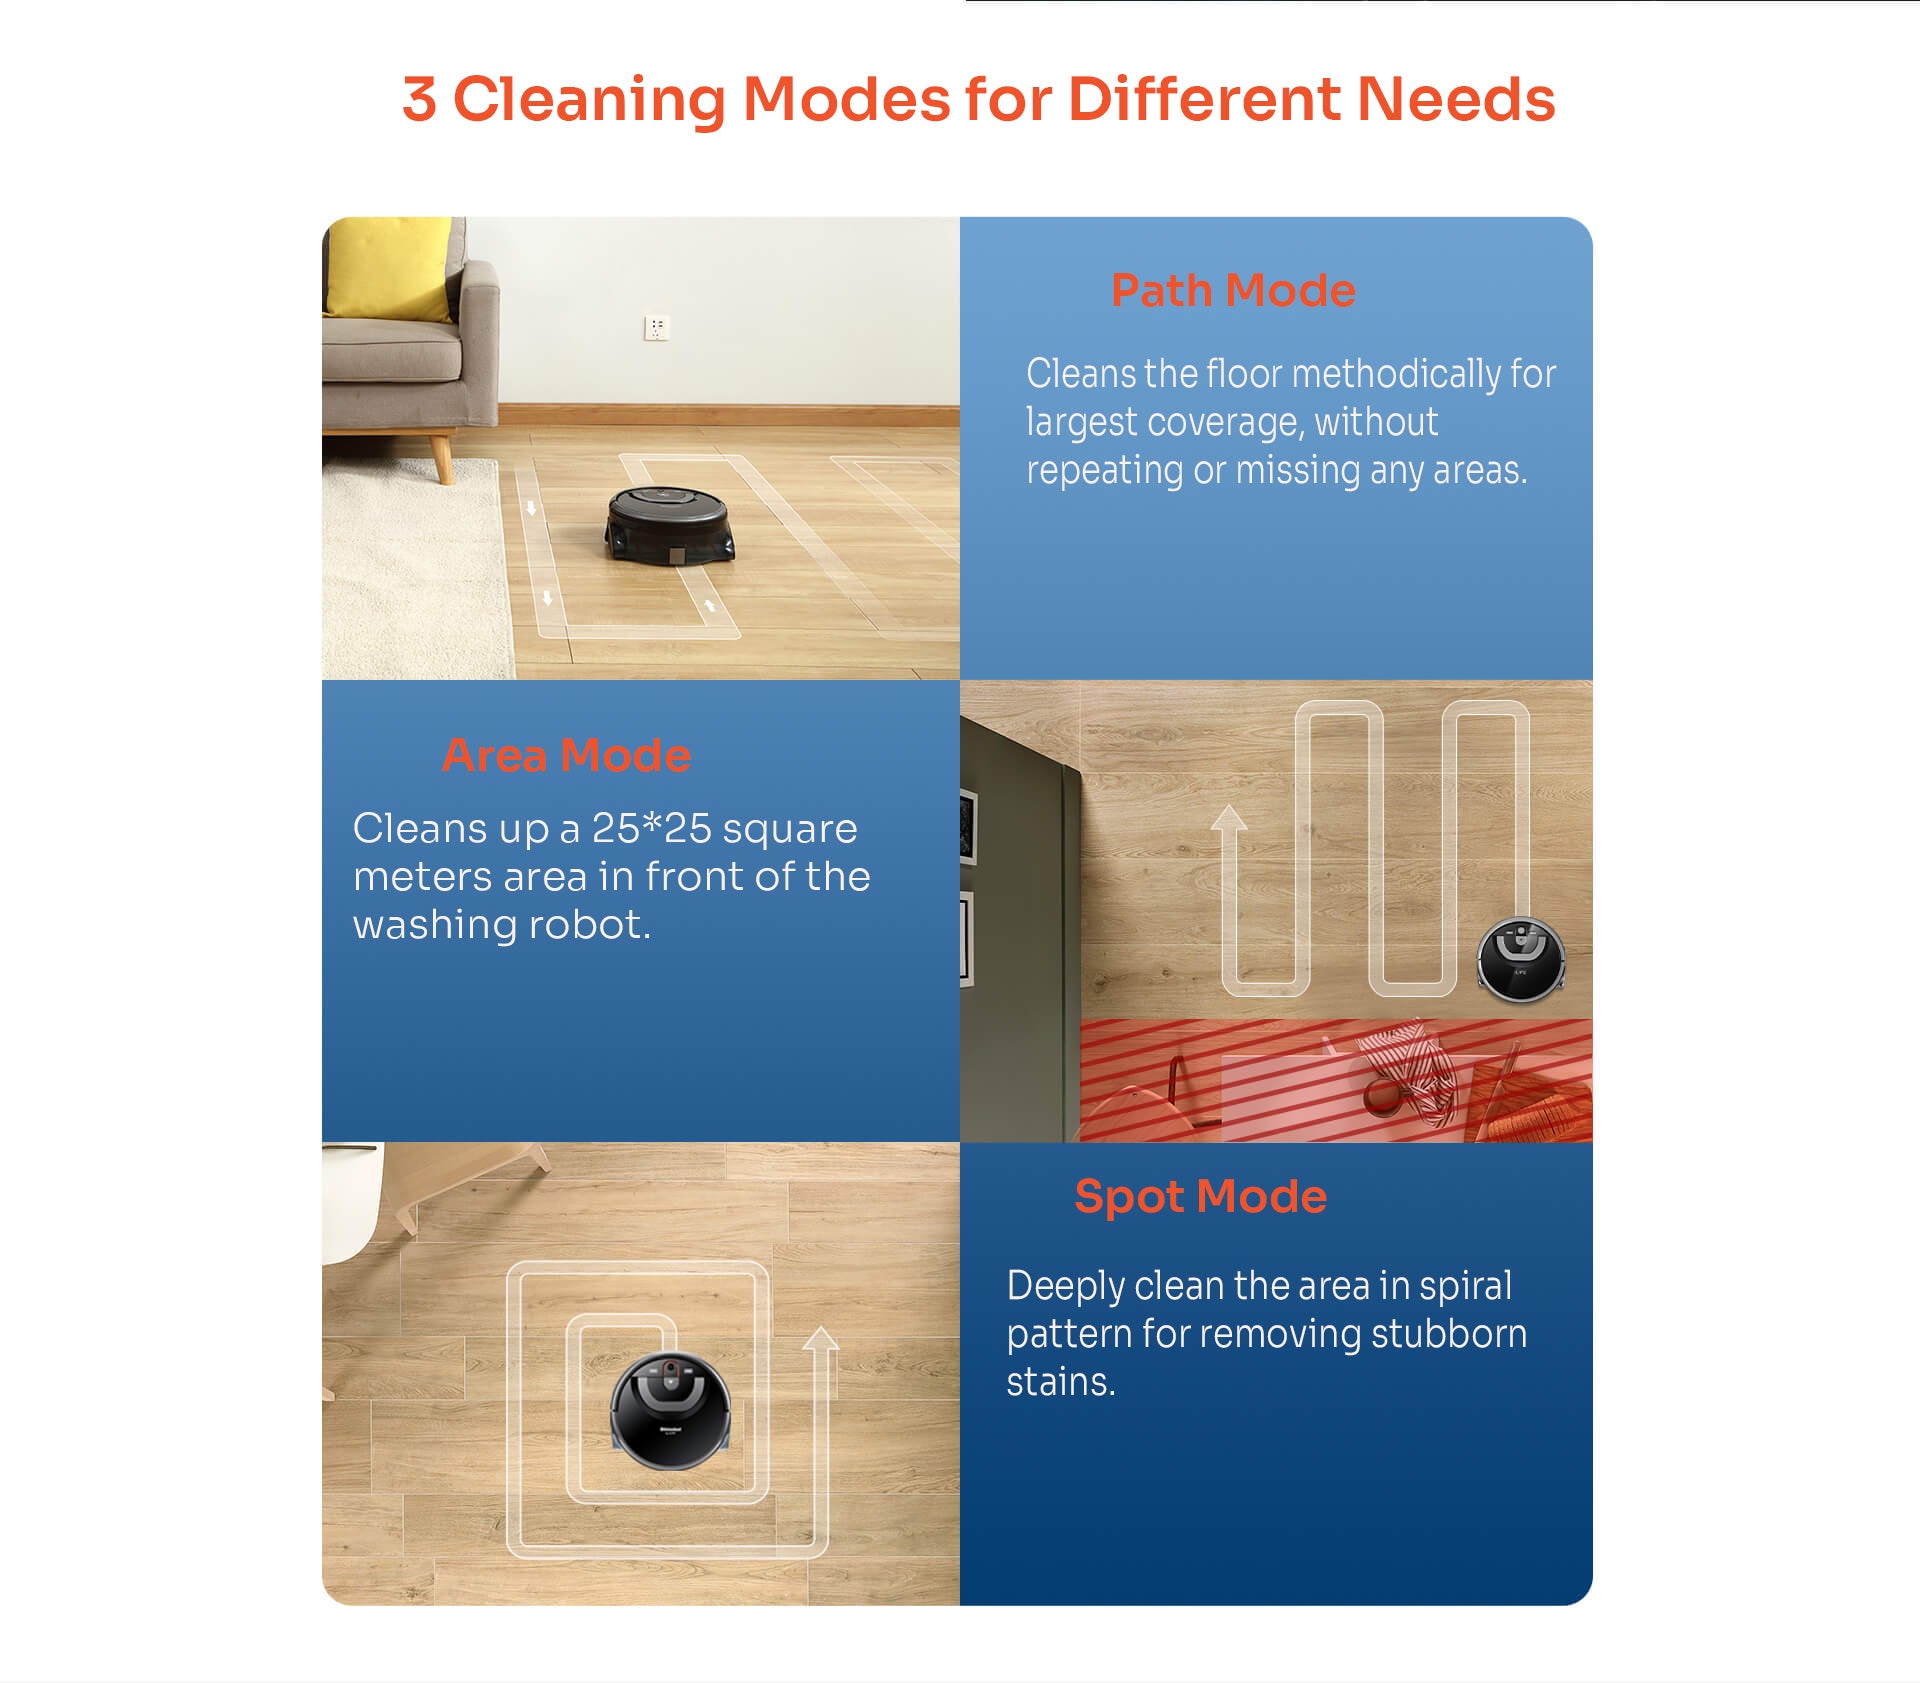 Three cleaning modes of different needs